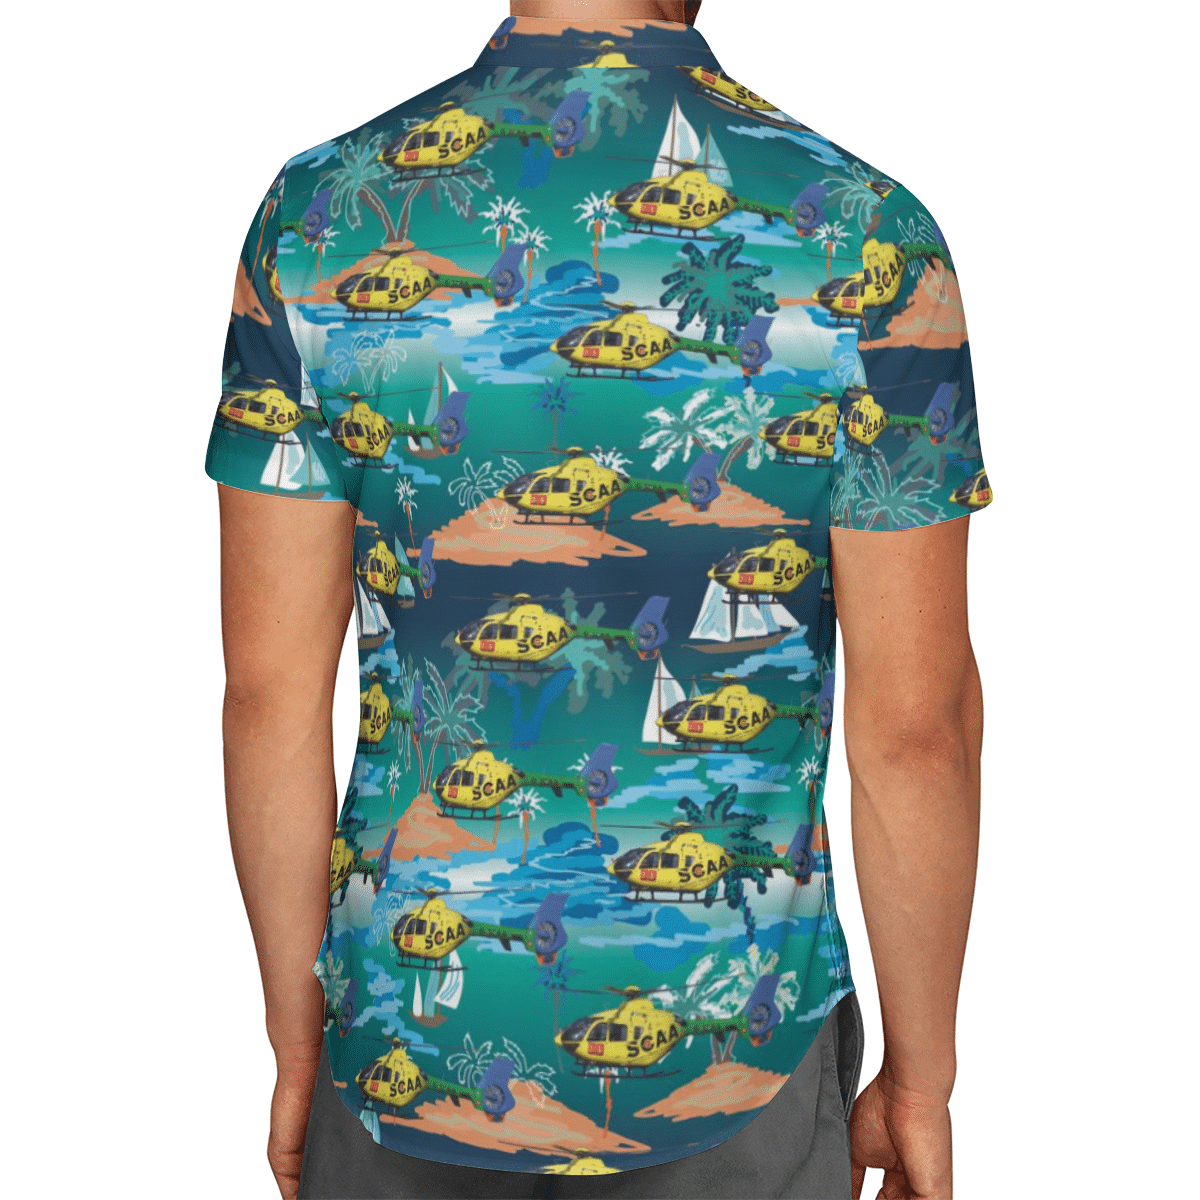 Going to the beach with a quality shirt 178